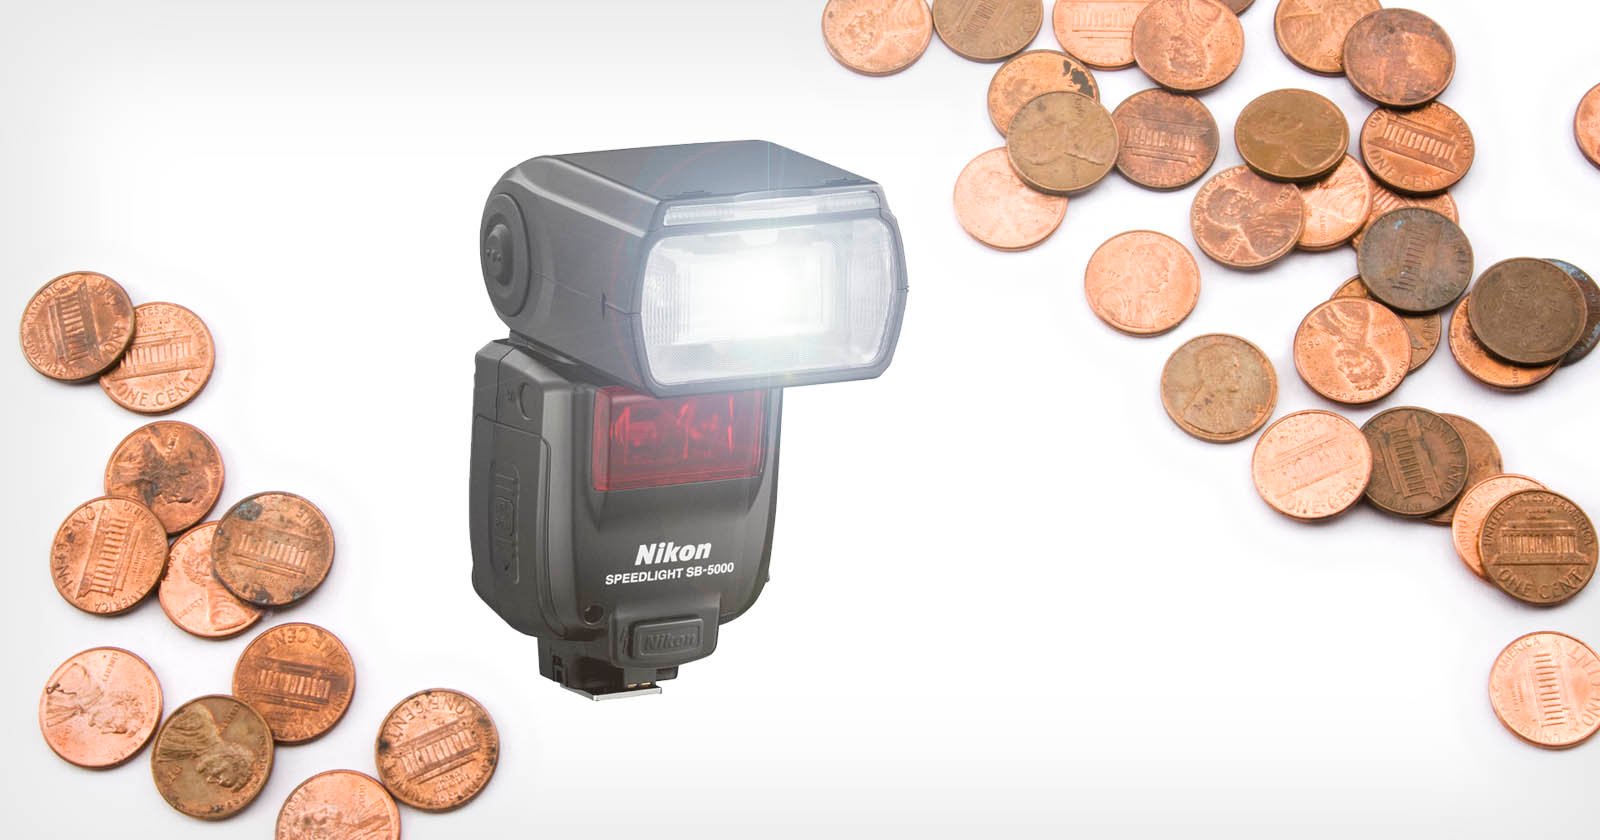 A Nikon camera flash surrounded by pennies